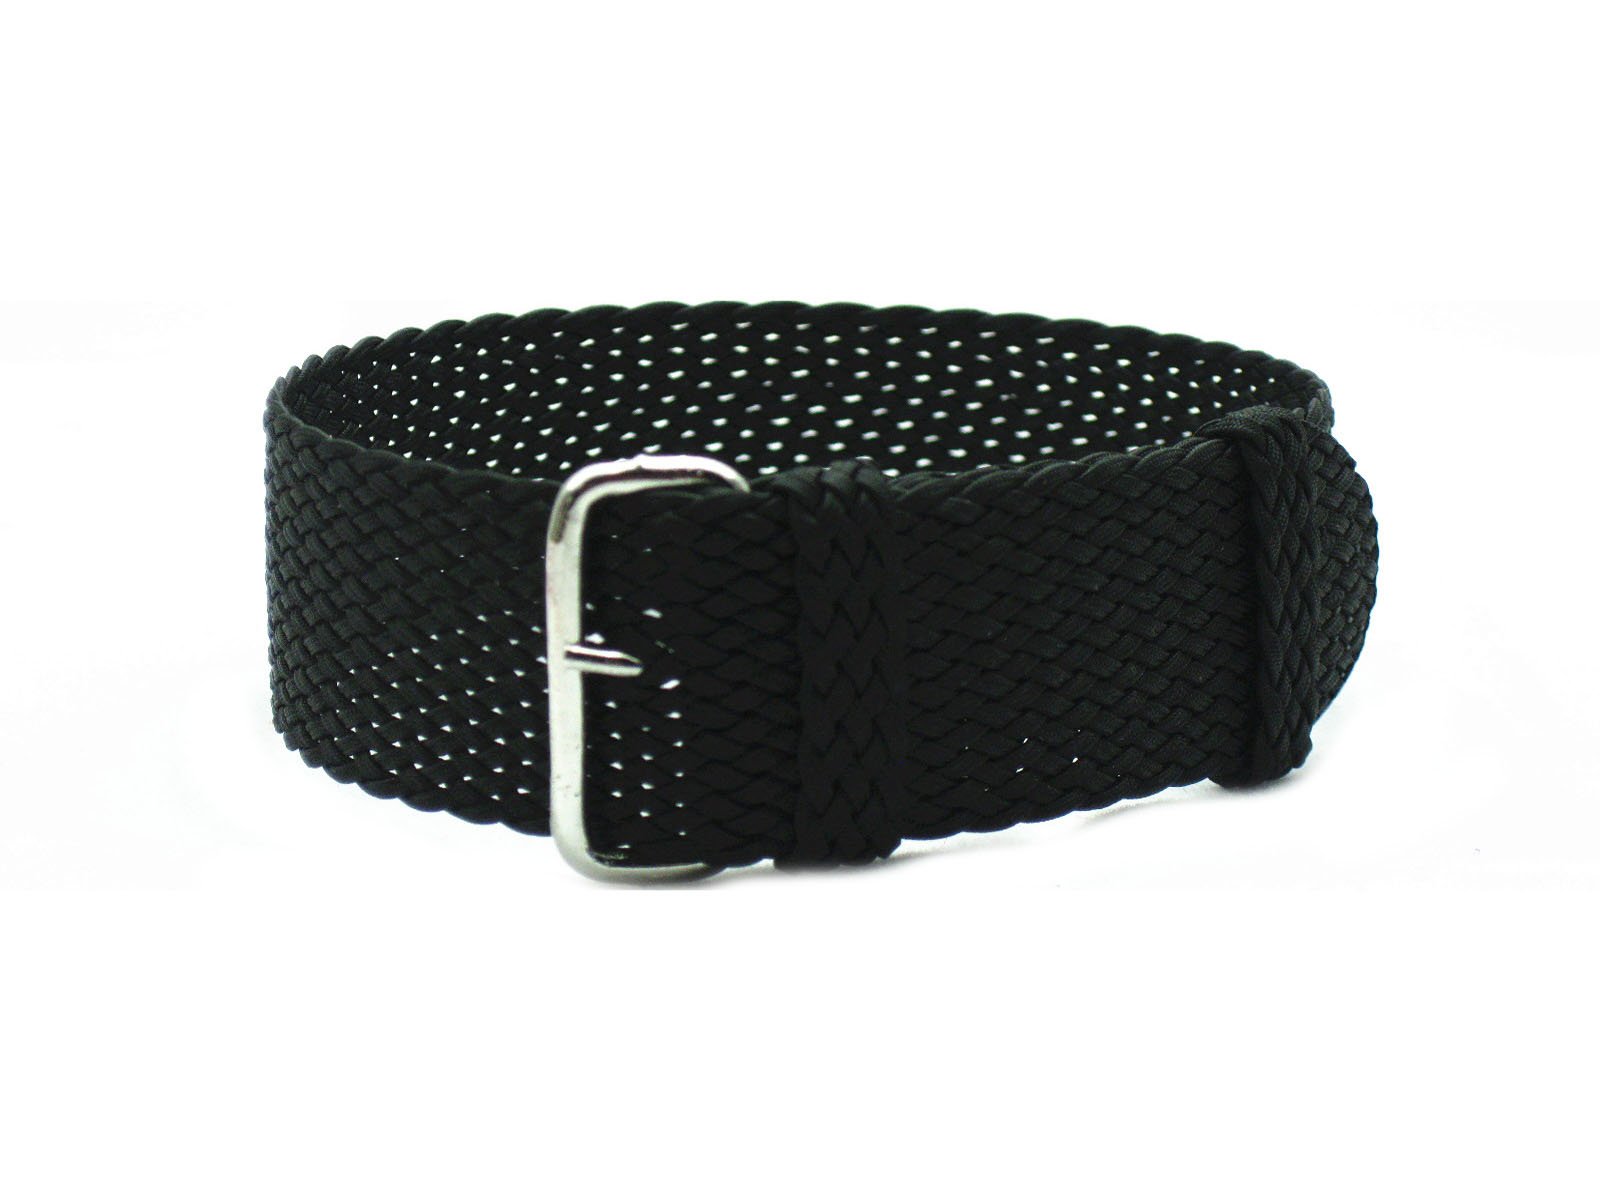 HNS 22mm Black Perlon Braided Woven Watch Strap with Silver Buckle